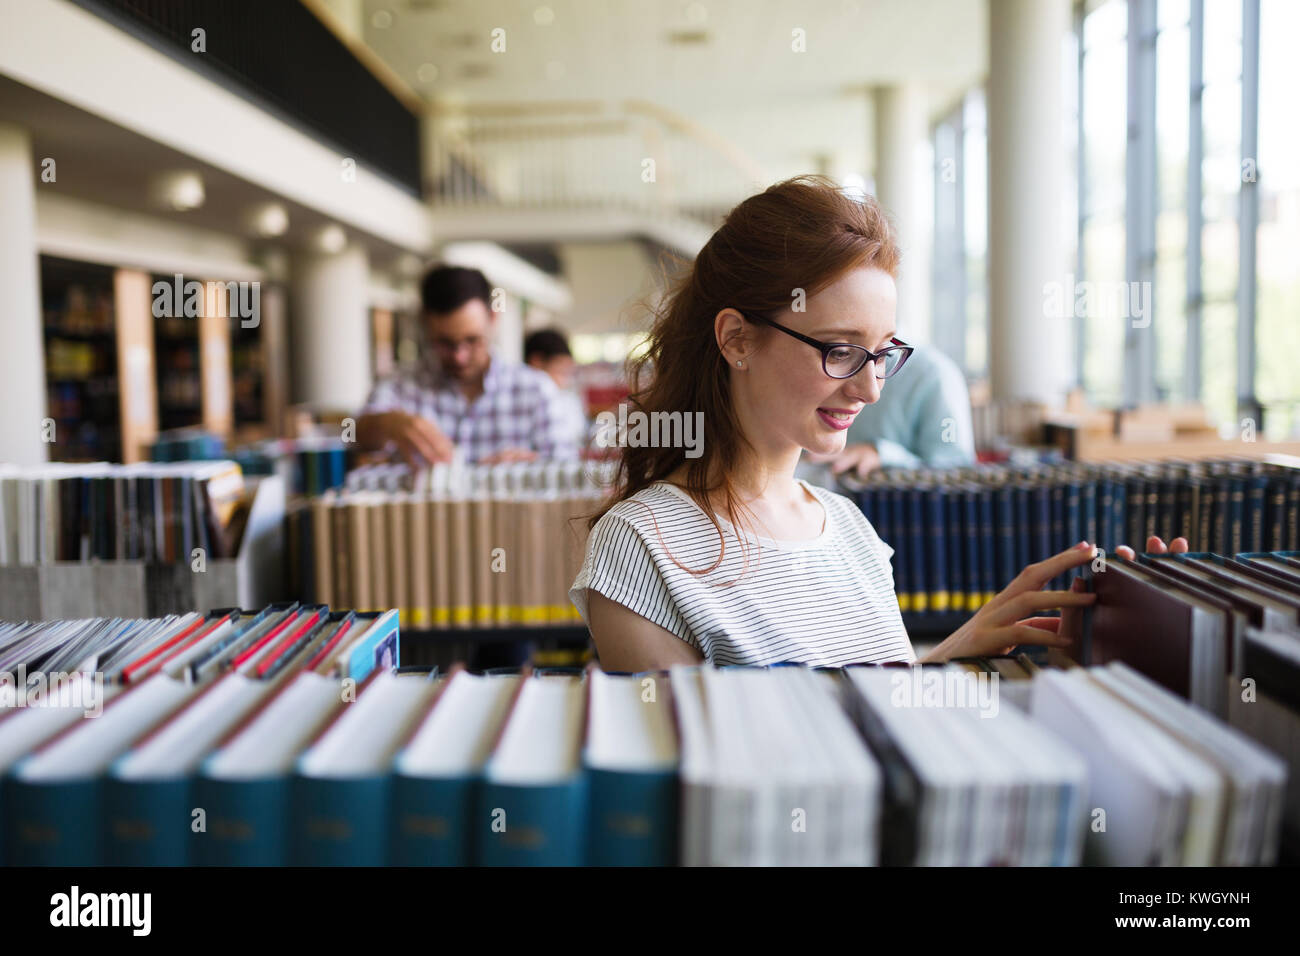 Portrait of a pretty smiling girl reading book in library Stock Photo